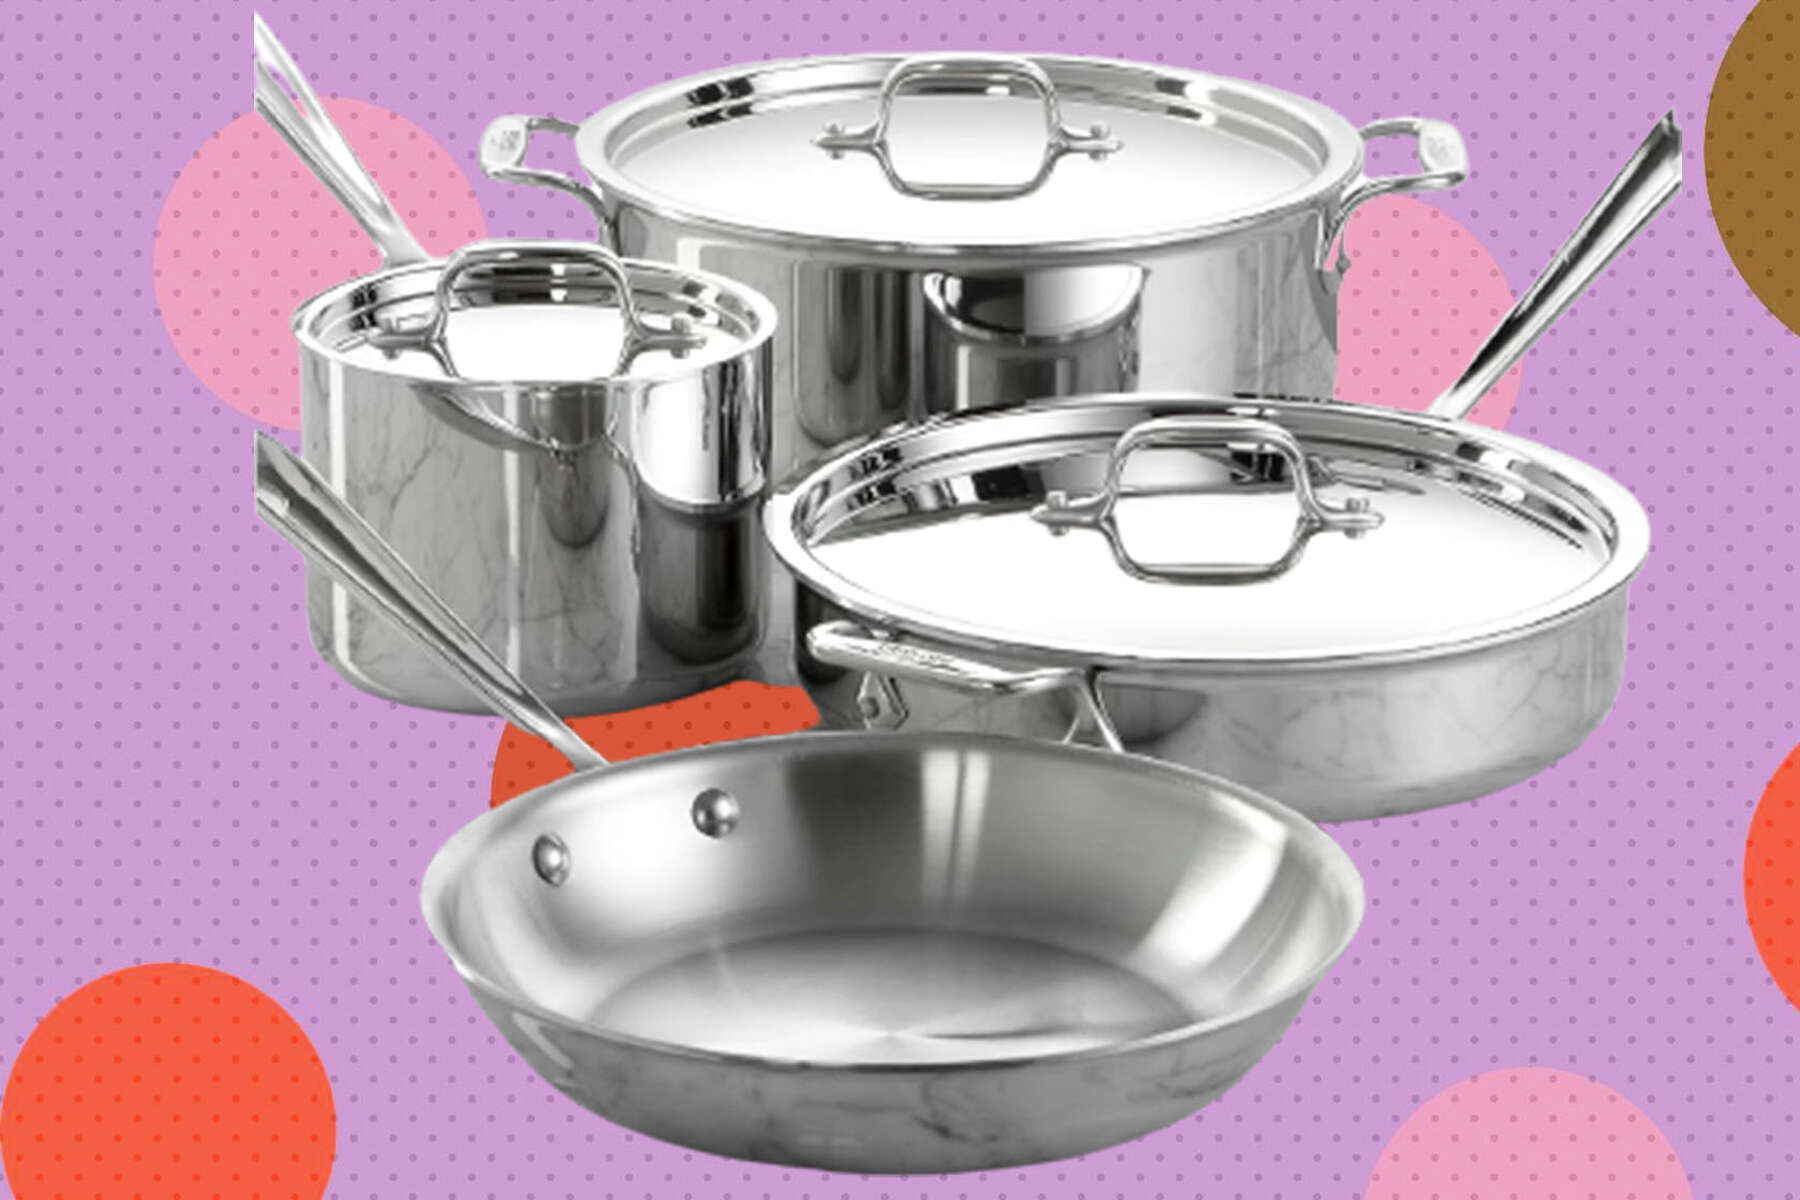 All-Clad Master Chef 9-Pc. Cookware Set, Created for Macy's - Macy's